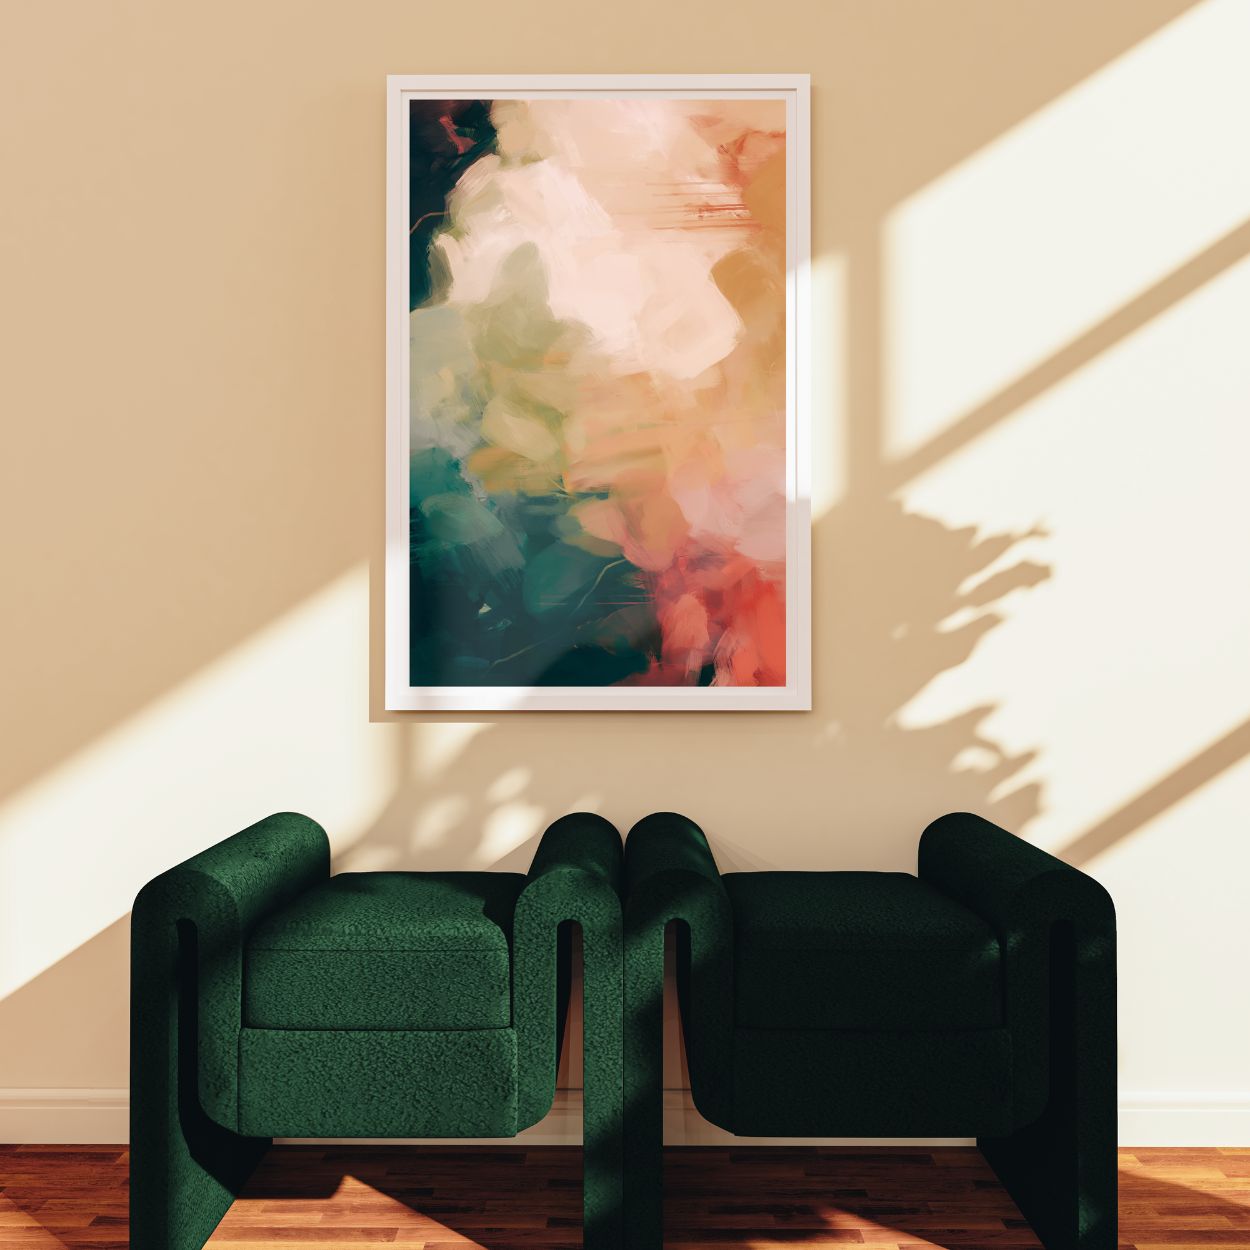 Eventide, green and red colorful abstract wall art print by Parima Studio. Large art for over armchairs in living room